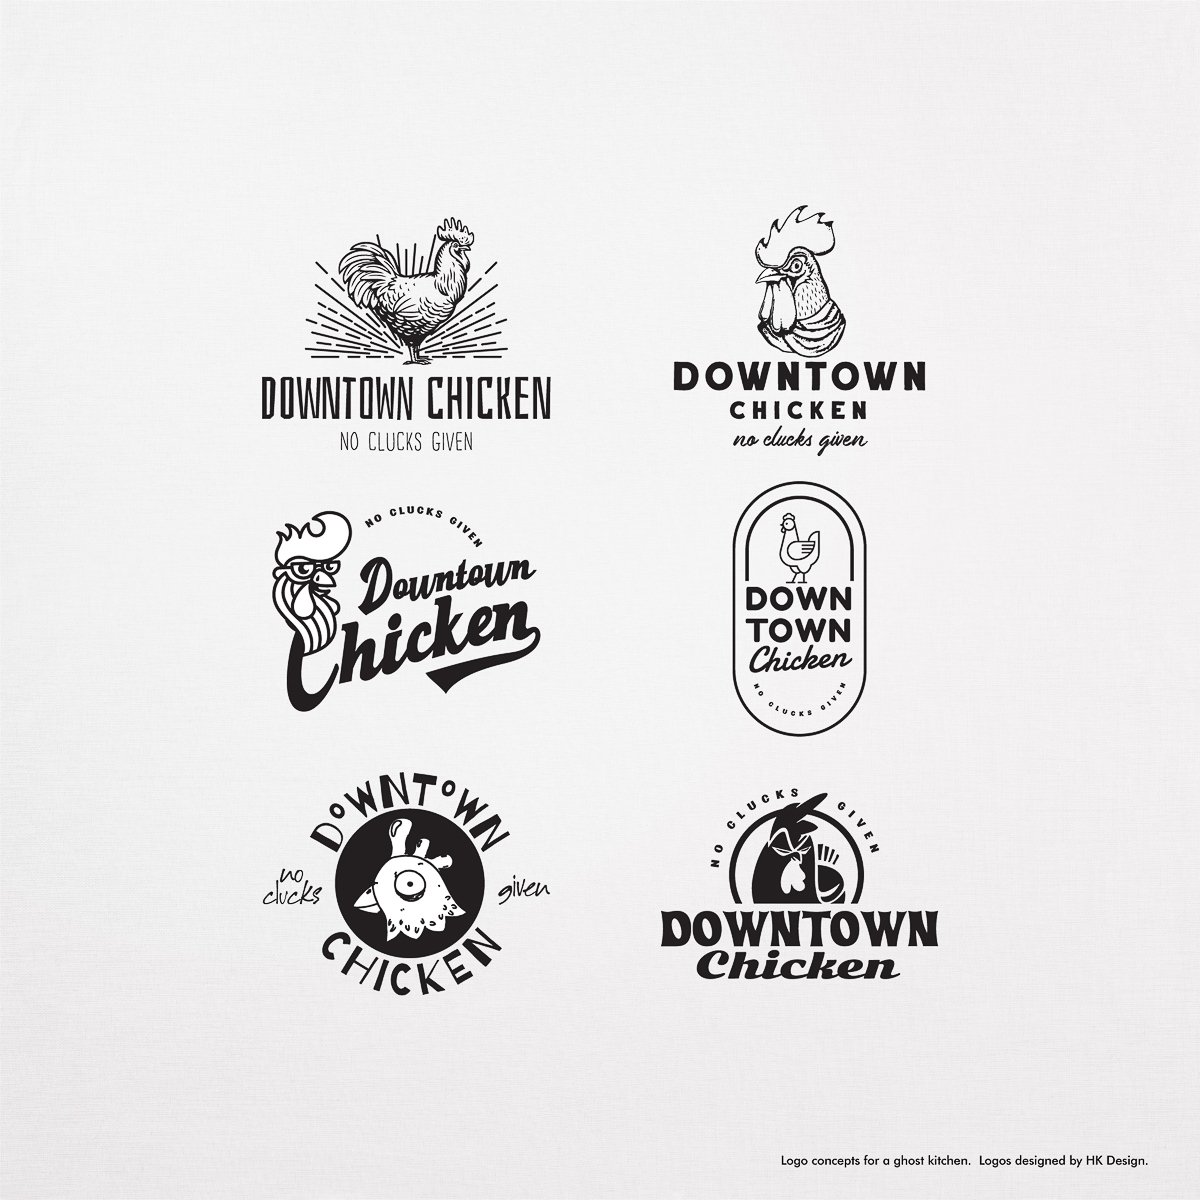 Logo concepts for Downtown Chicken at Indie.